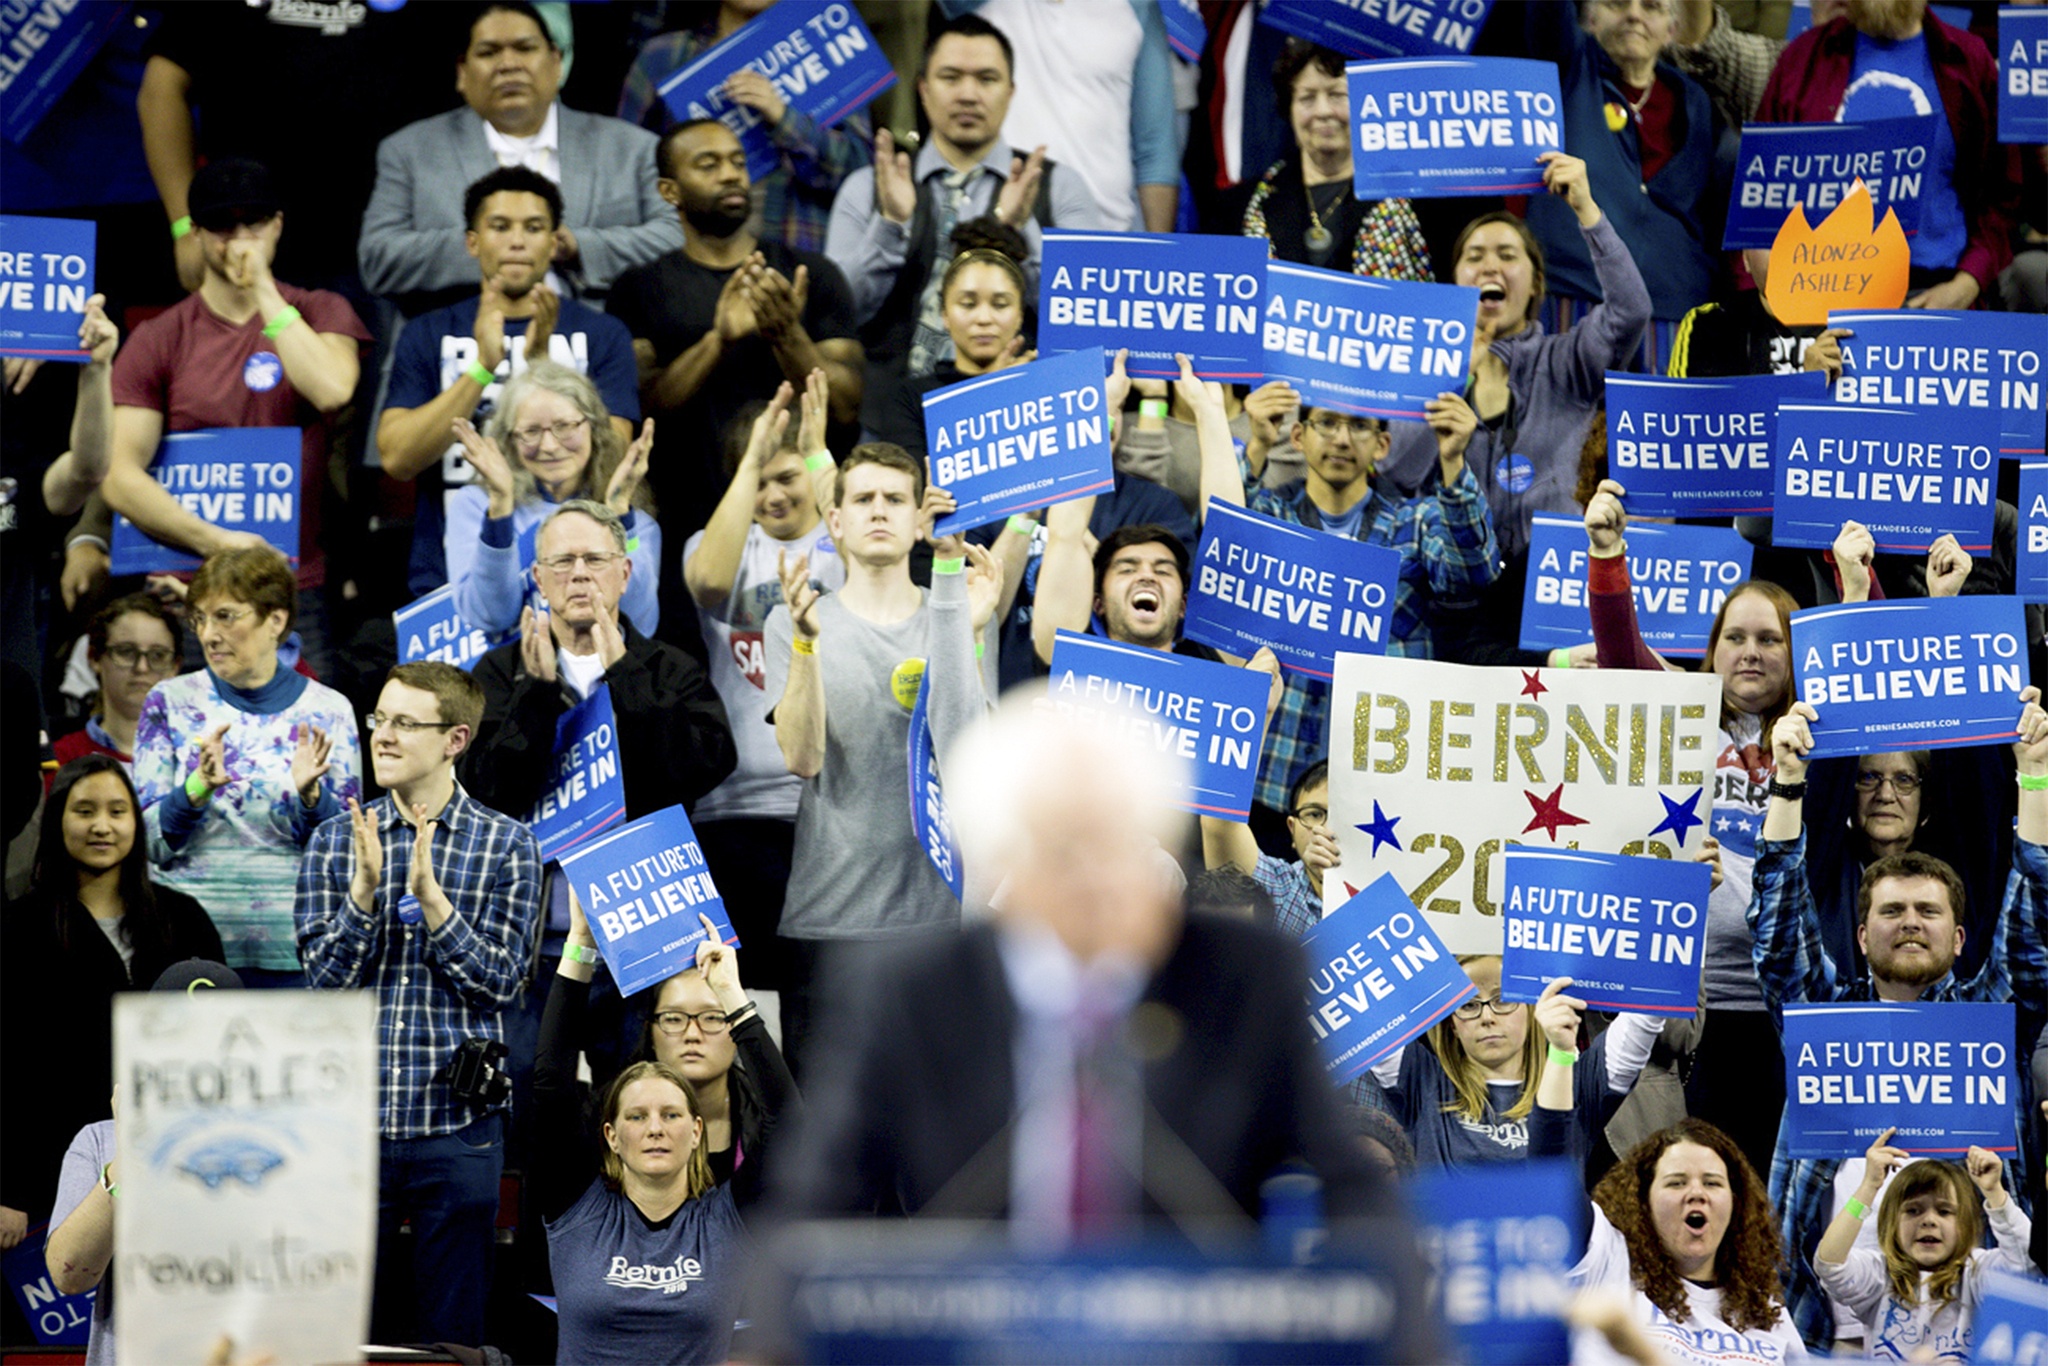 Bernie Sanders supporters cheer for the presidential candidate during a rally in Seattle on March 20, 2016. Photo by Jeremy Dwyer-Lindgren.